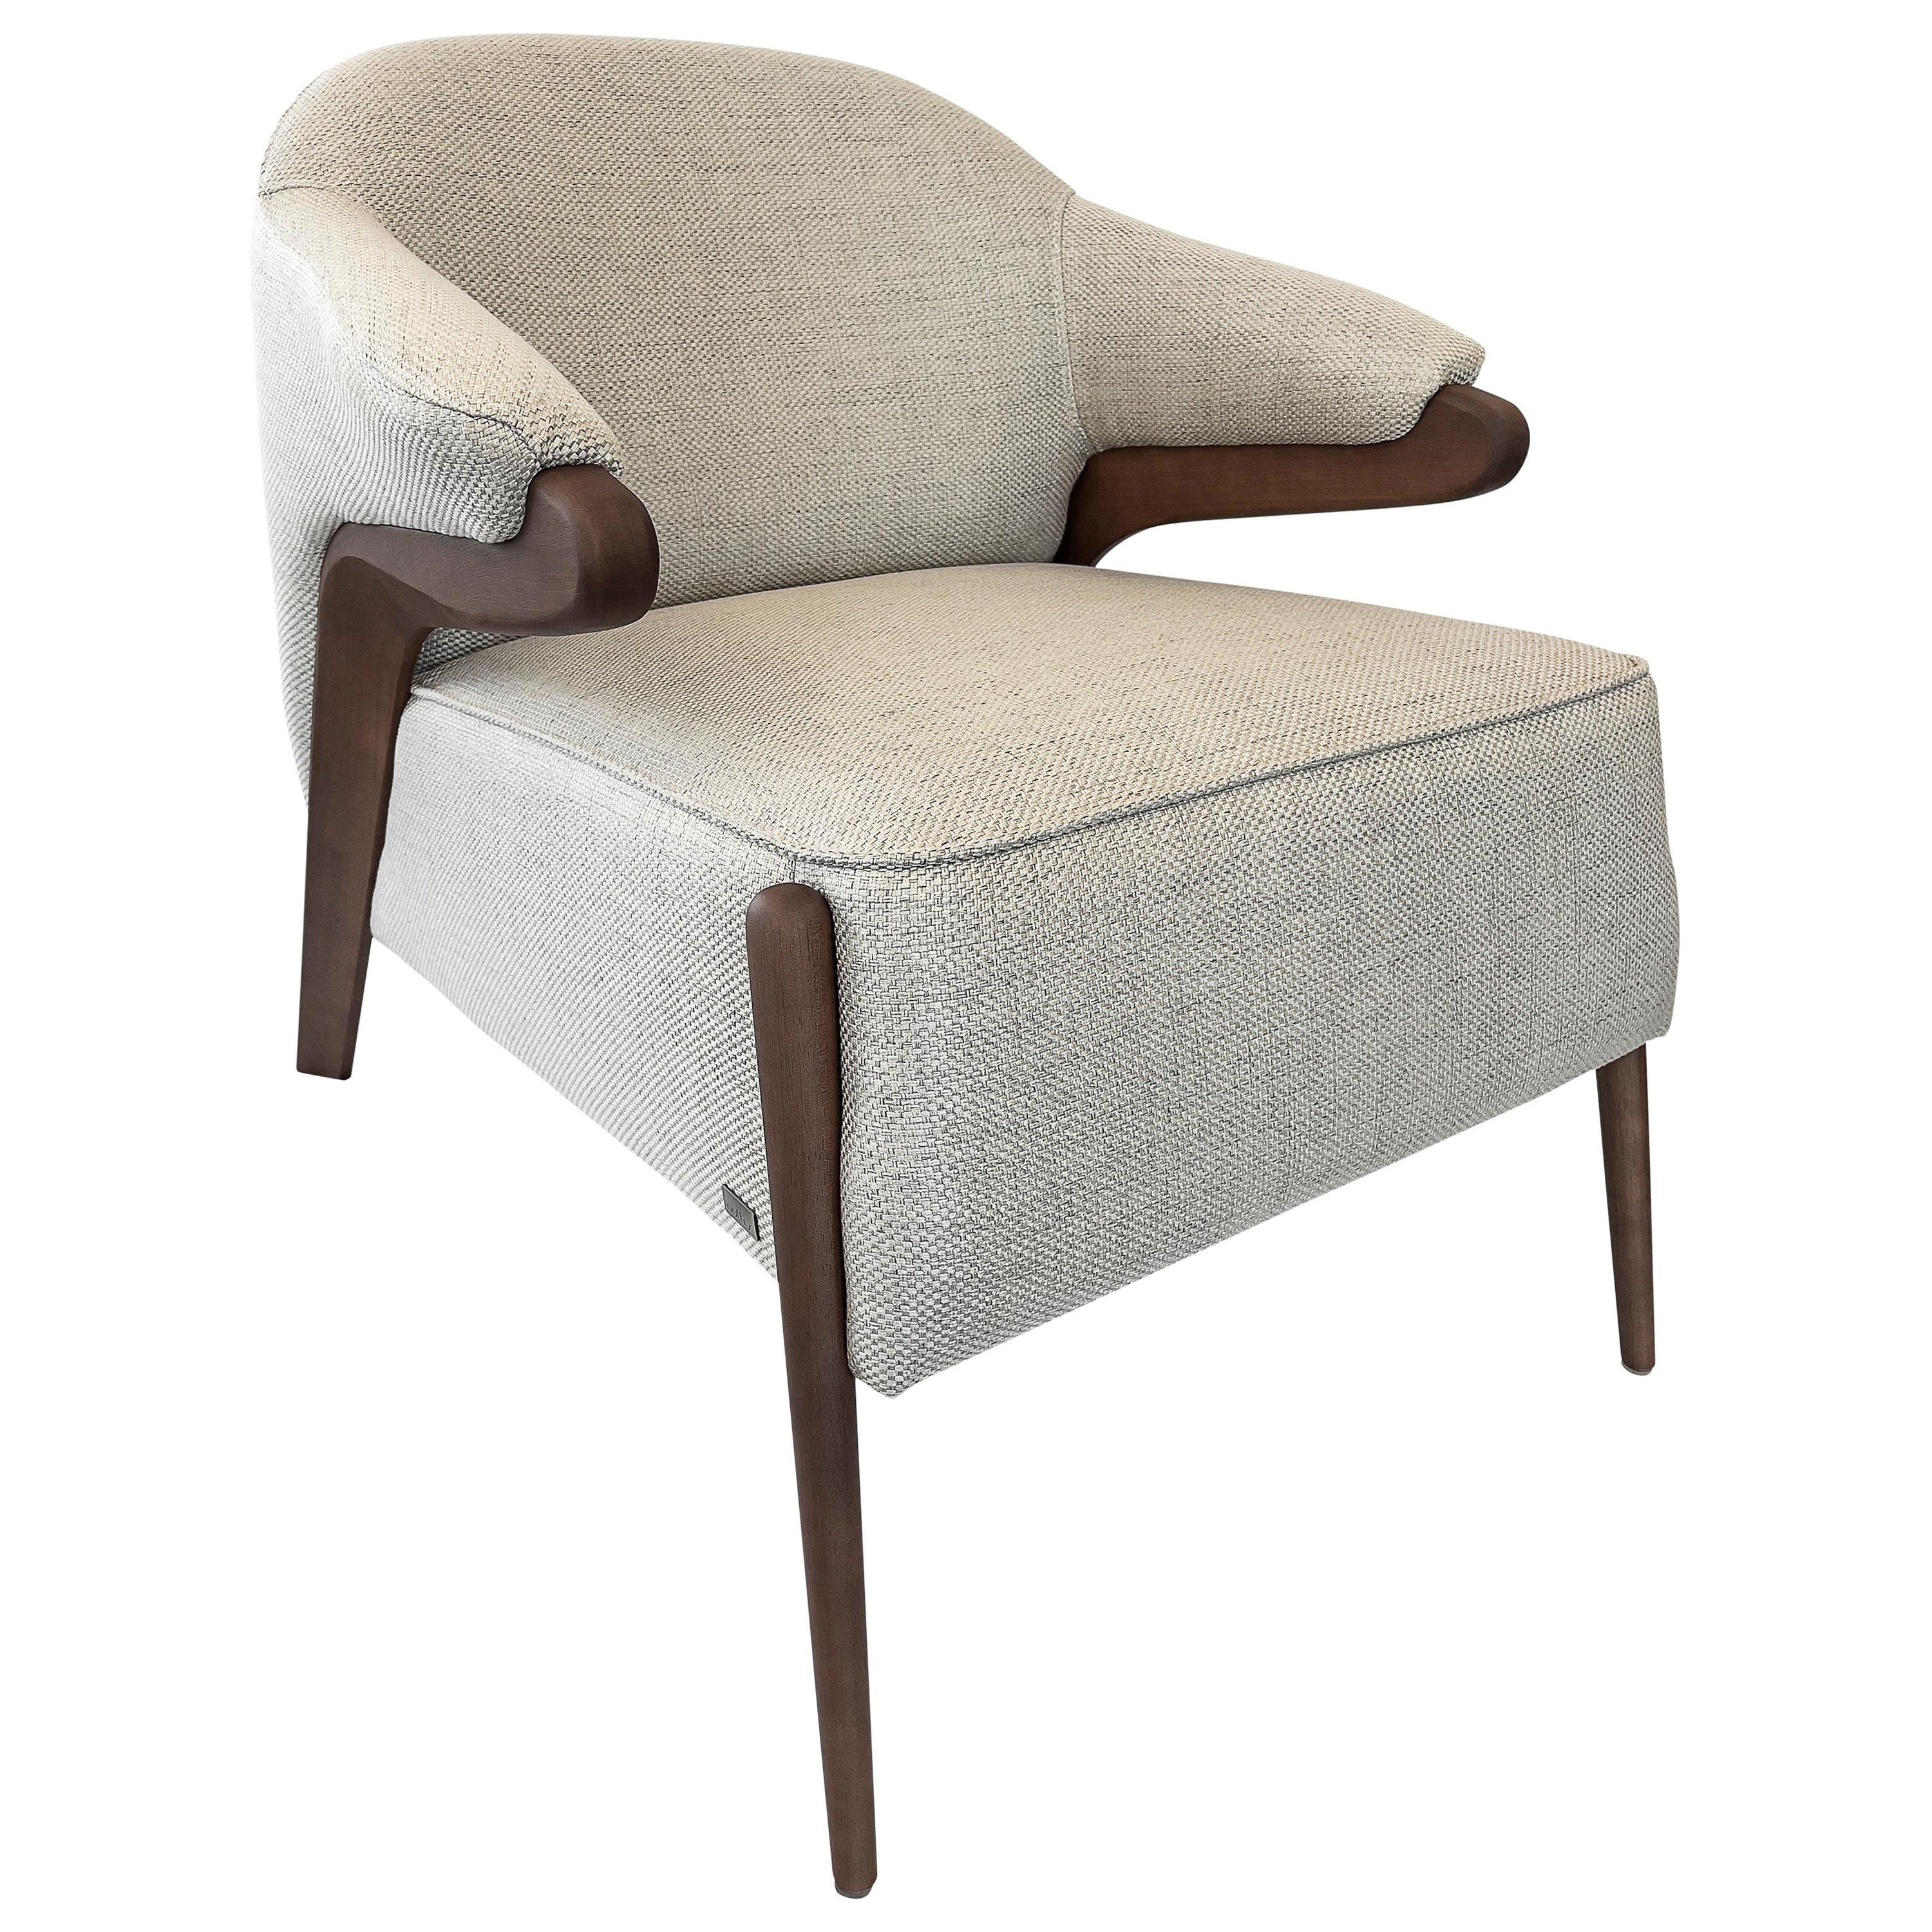 Osa Upholstered Armchair in Walnut Wood Finish Frame and Beige Fabric